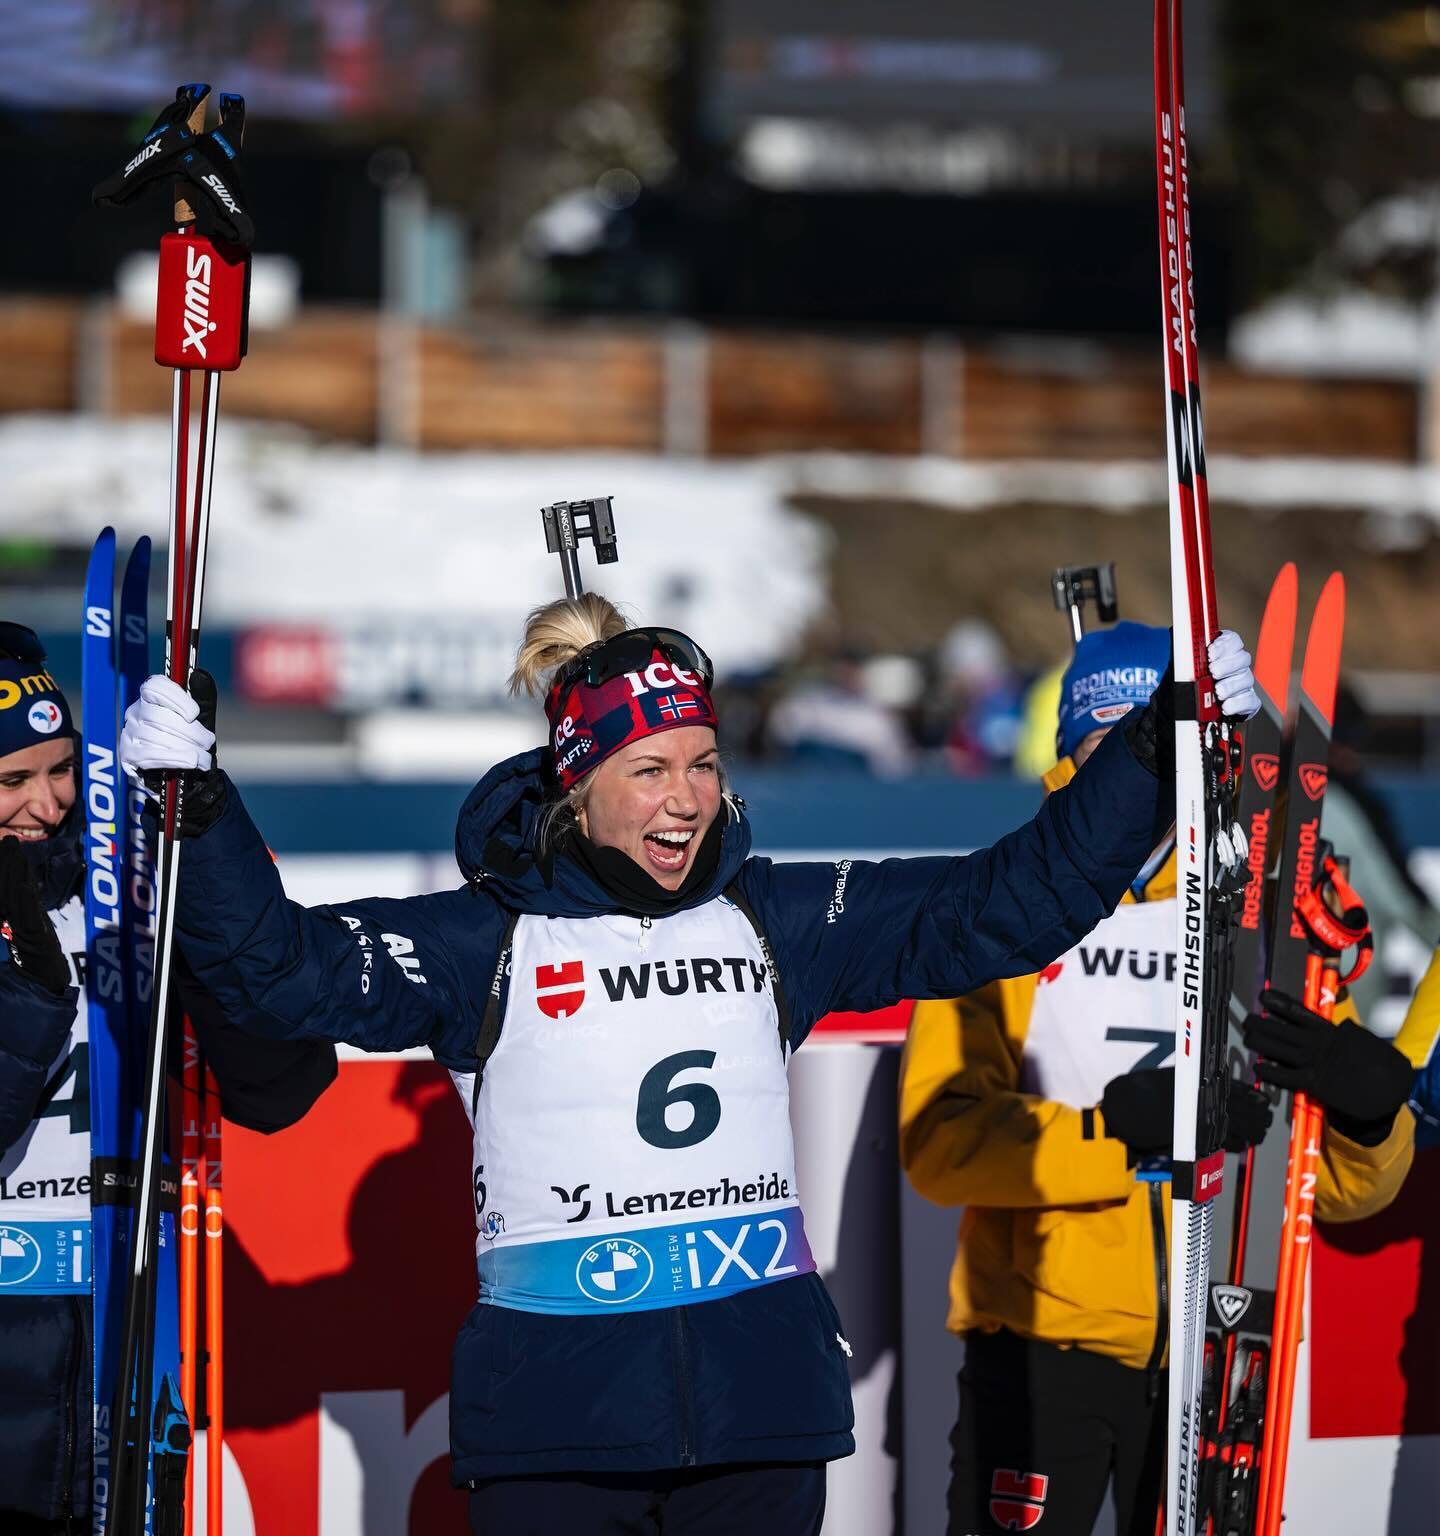 A saleswoman from Norway sensationally won a medal at the Biathlon World Cup. Photo 